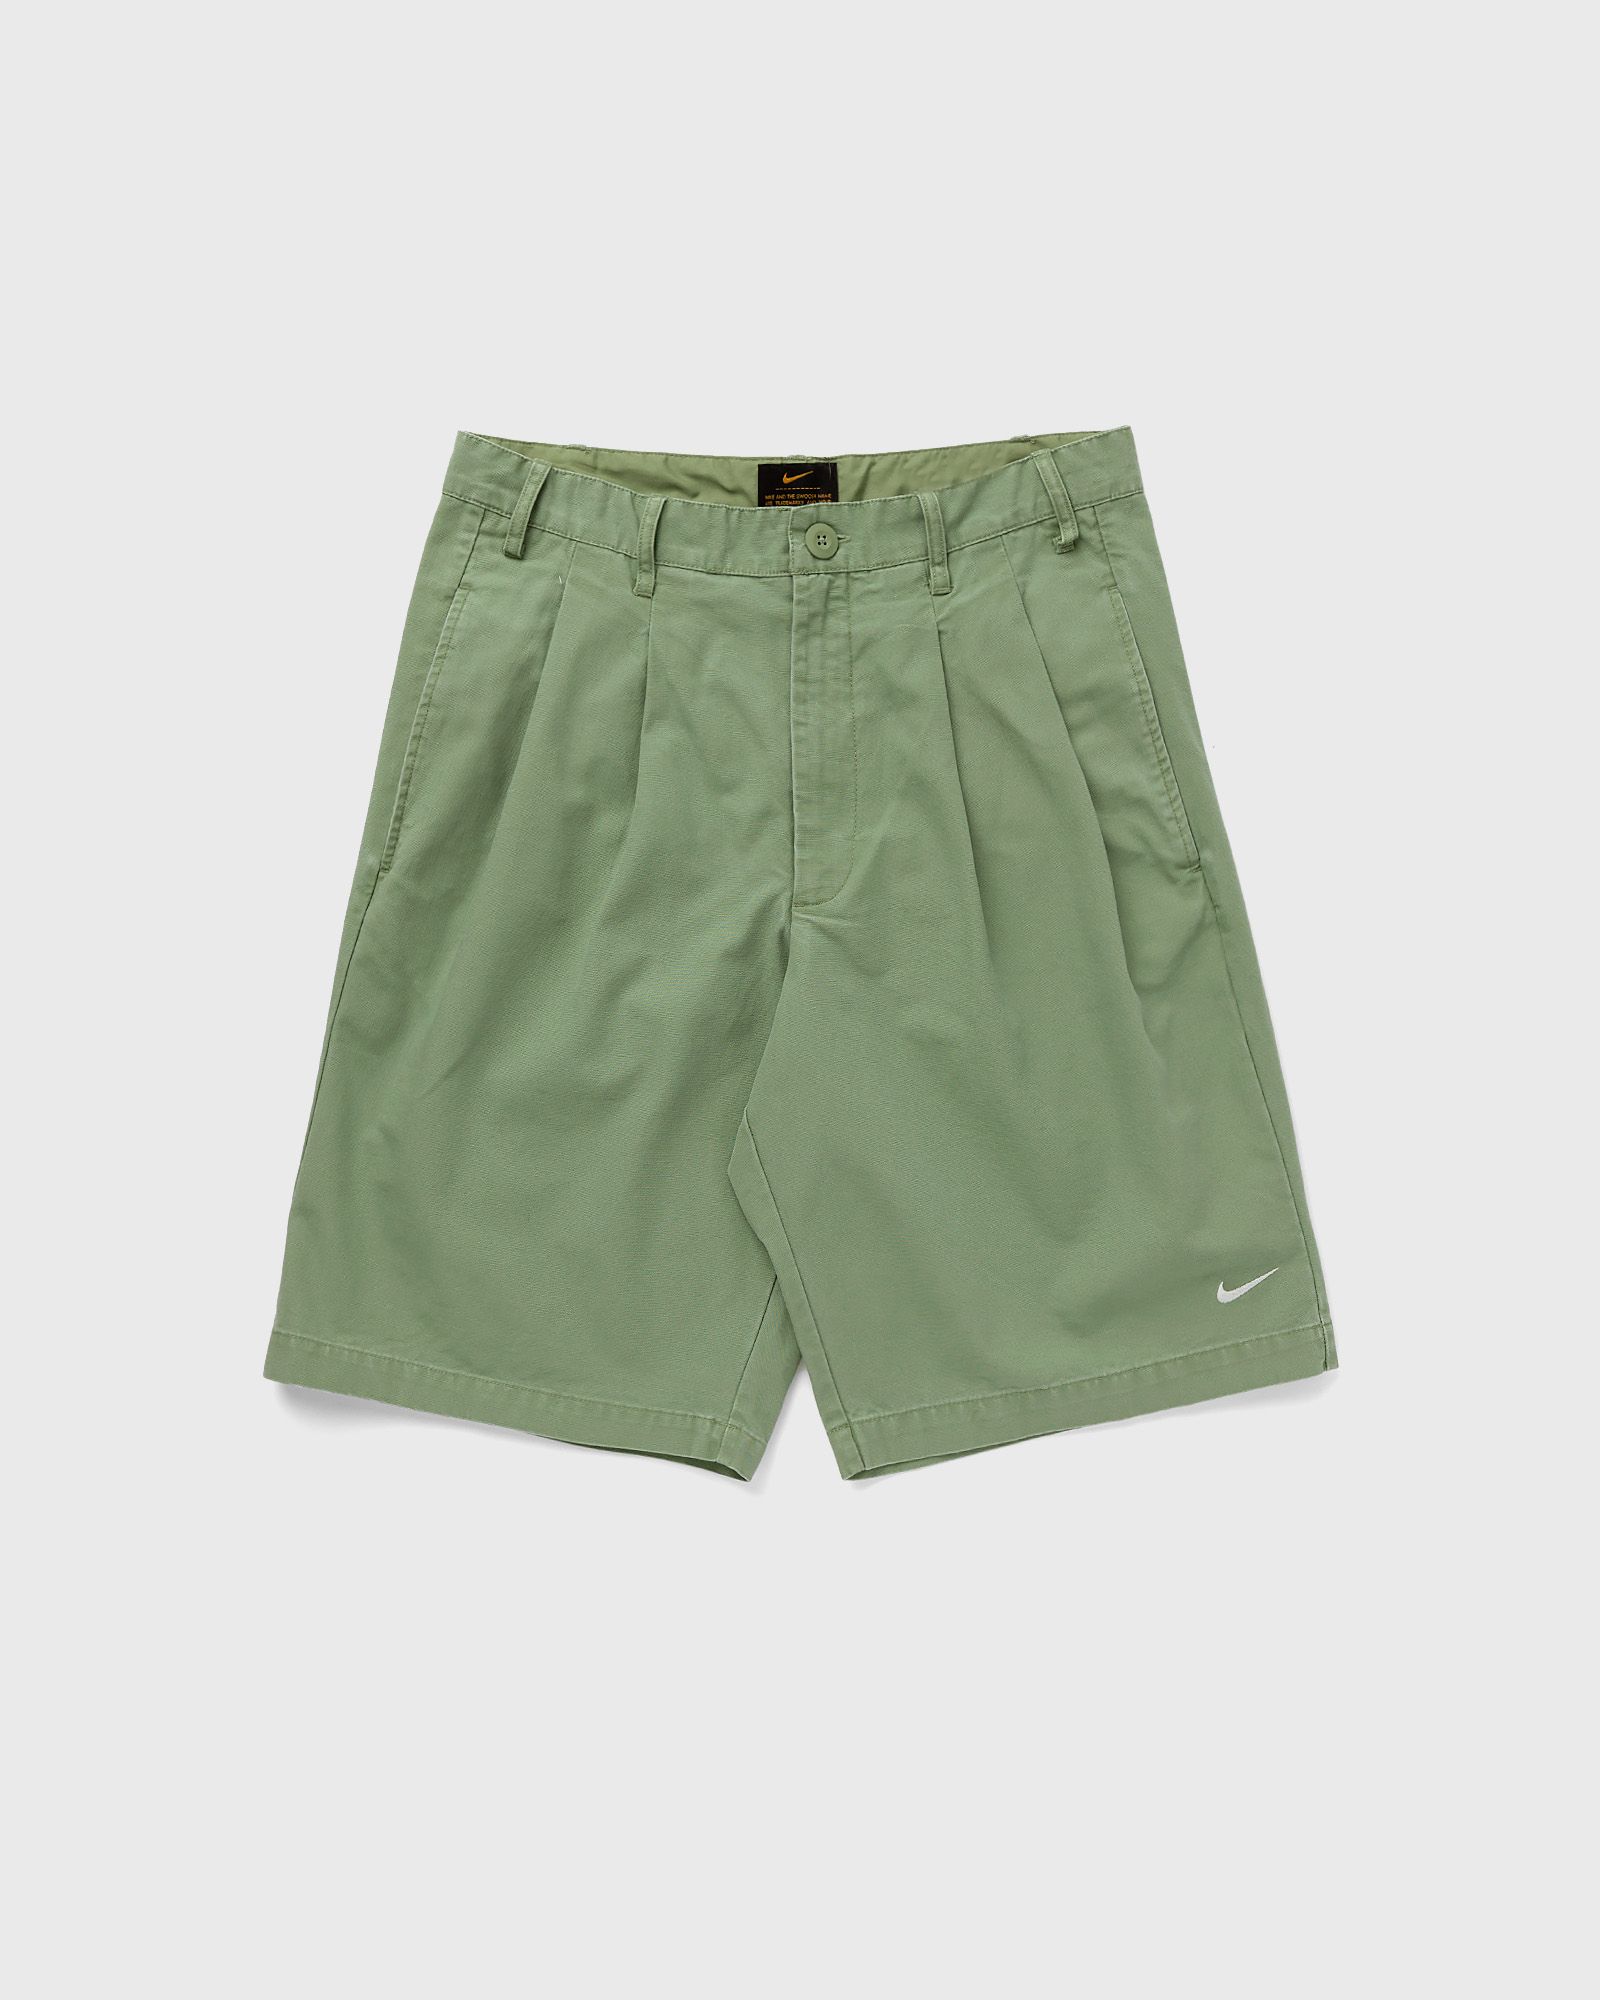 Nike - pleated chino shorts men casual shorts green in größe:l